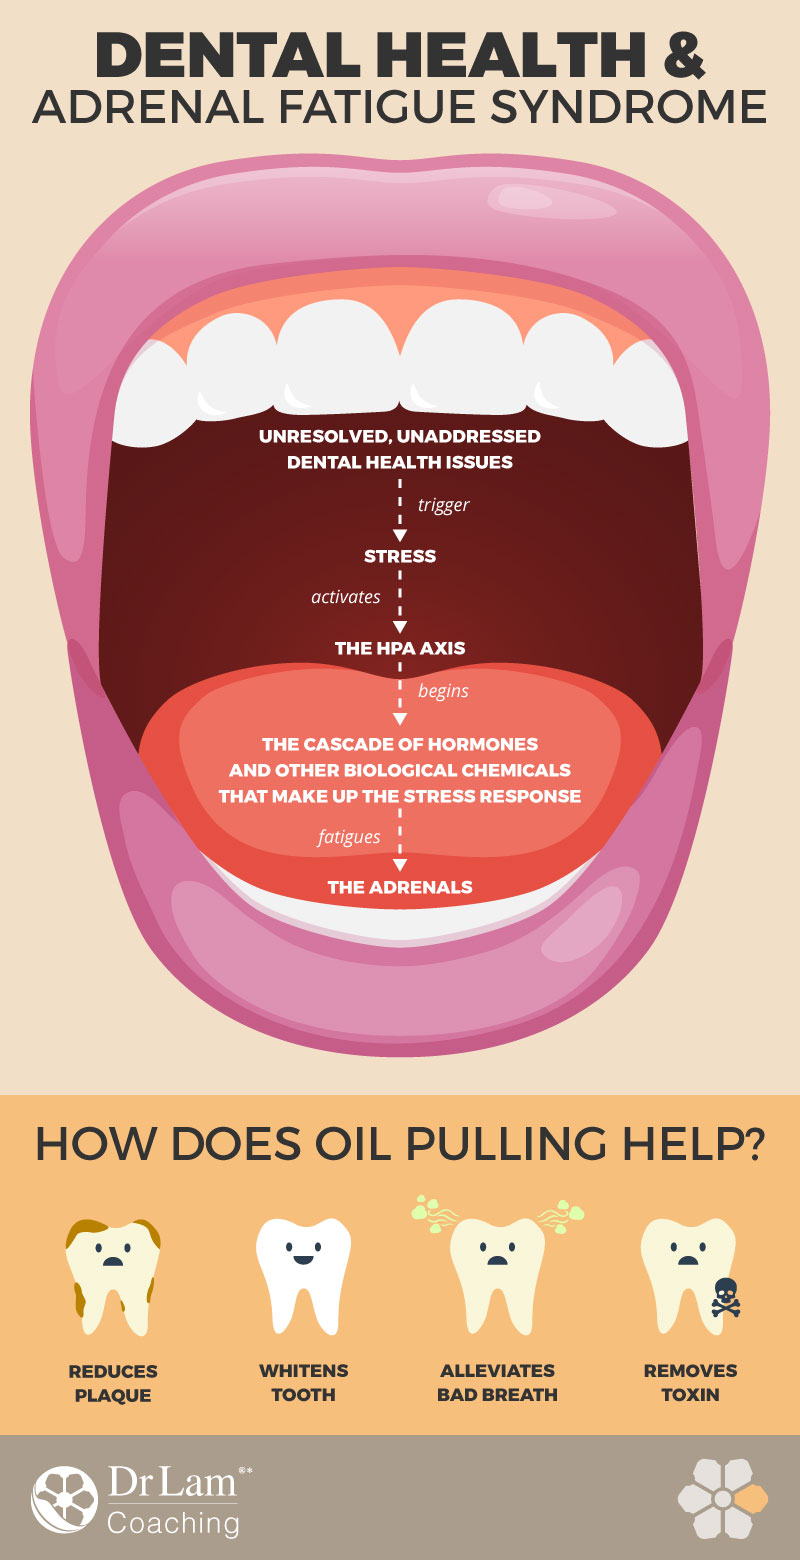 Check out this easy to understand infographic about dental health and AFS